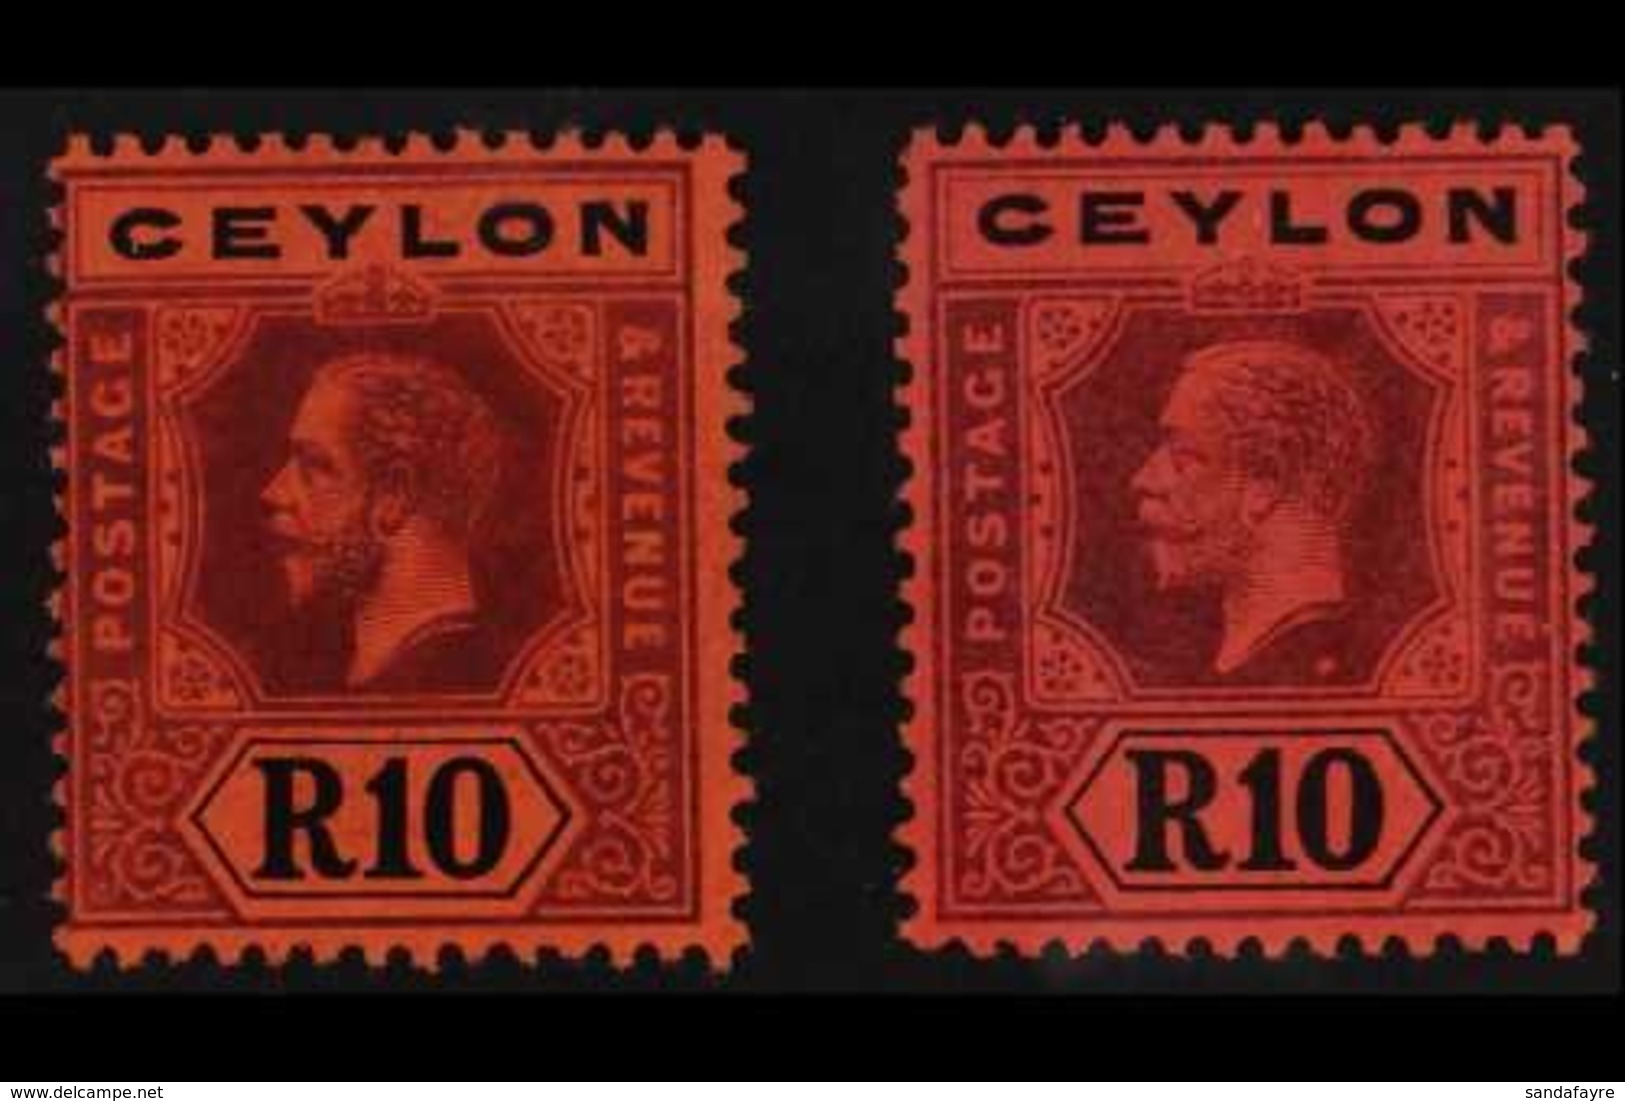 1912 - 25 10r Purple And Black On Red, Die I And Die II, SG 318, 318b, Very Fine Mint. (2 Stamps) For More Images, Pleas - Ceilán (...-1947)